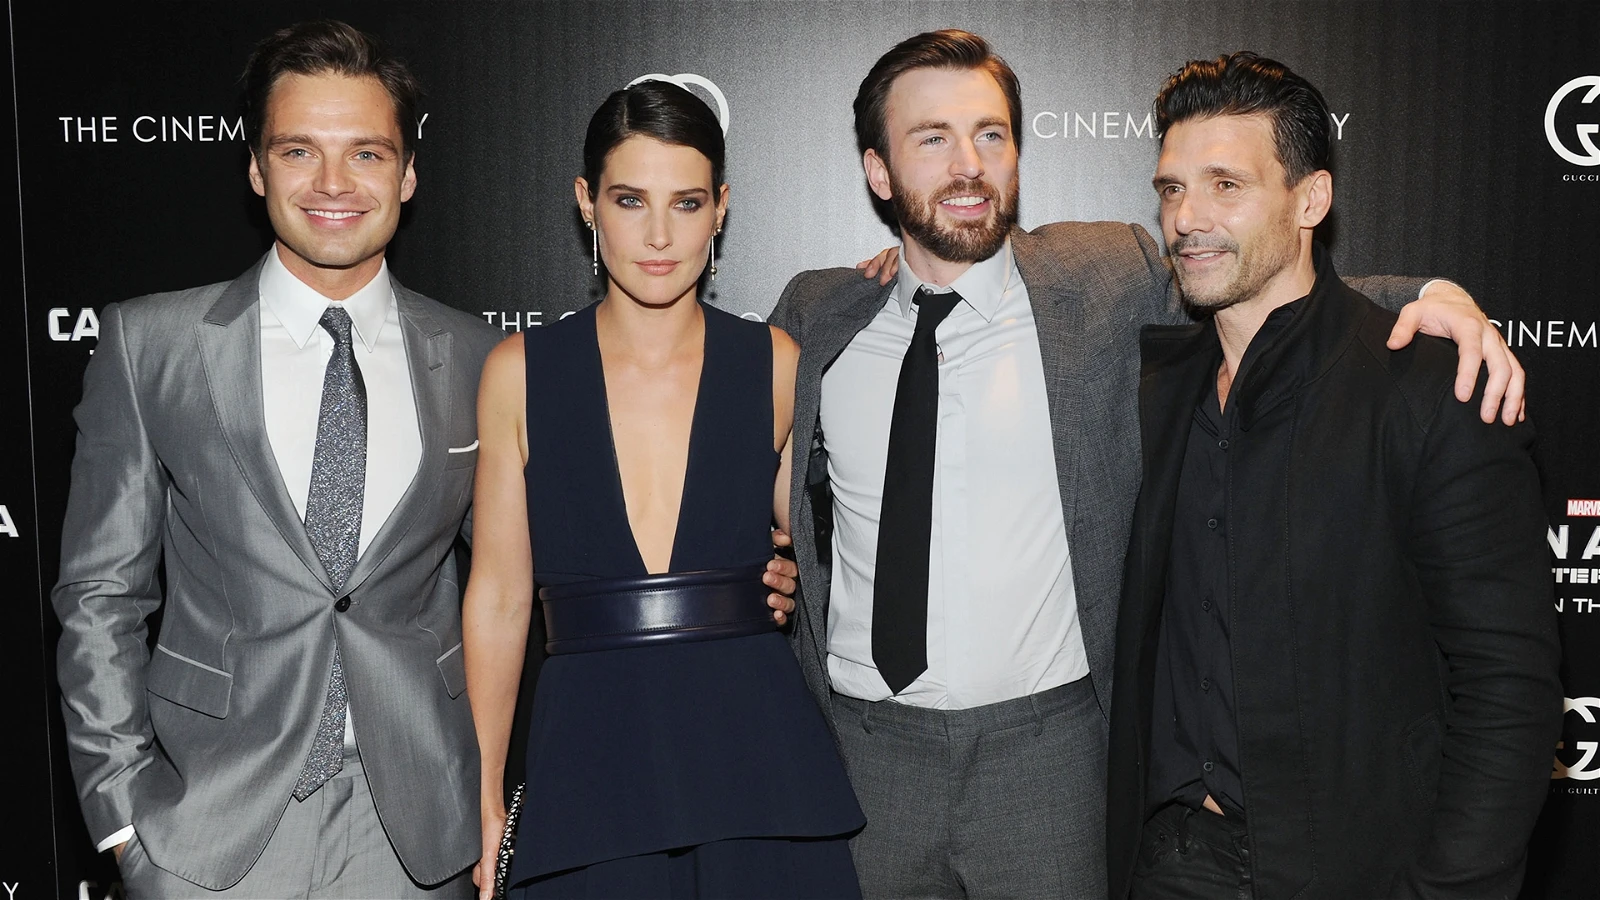 Chris Evans and Frank Grillo (middle right and far right)